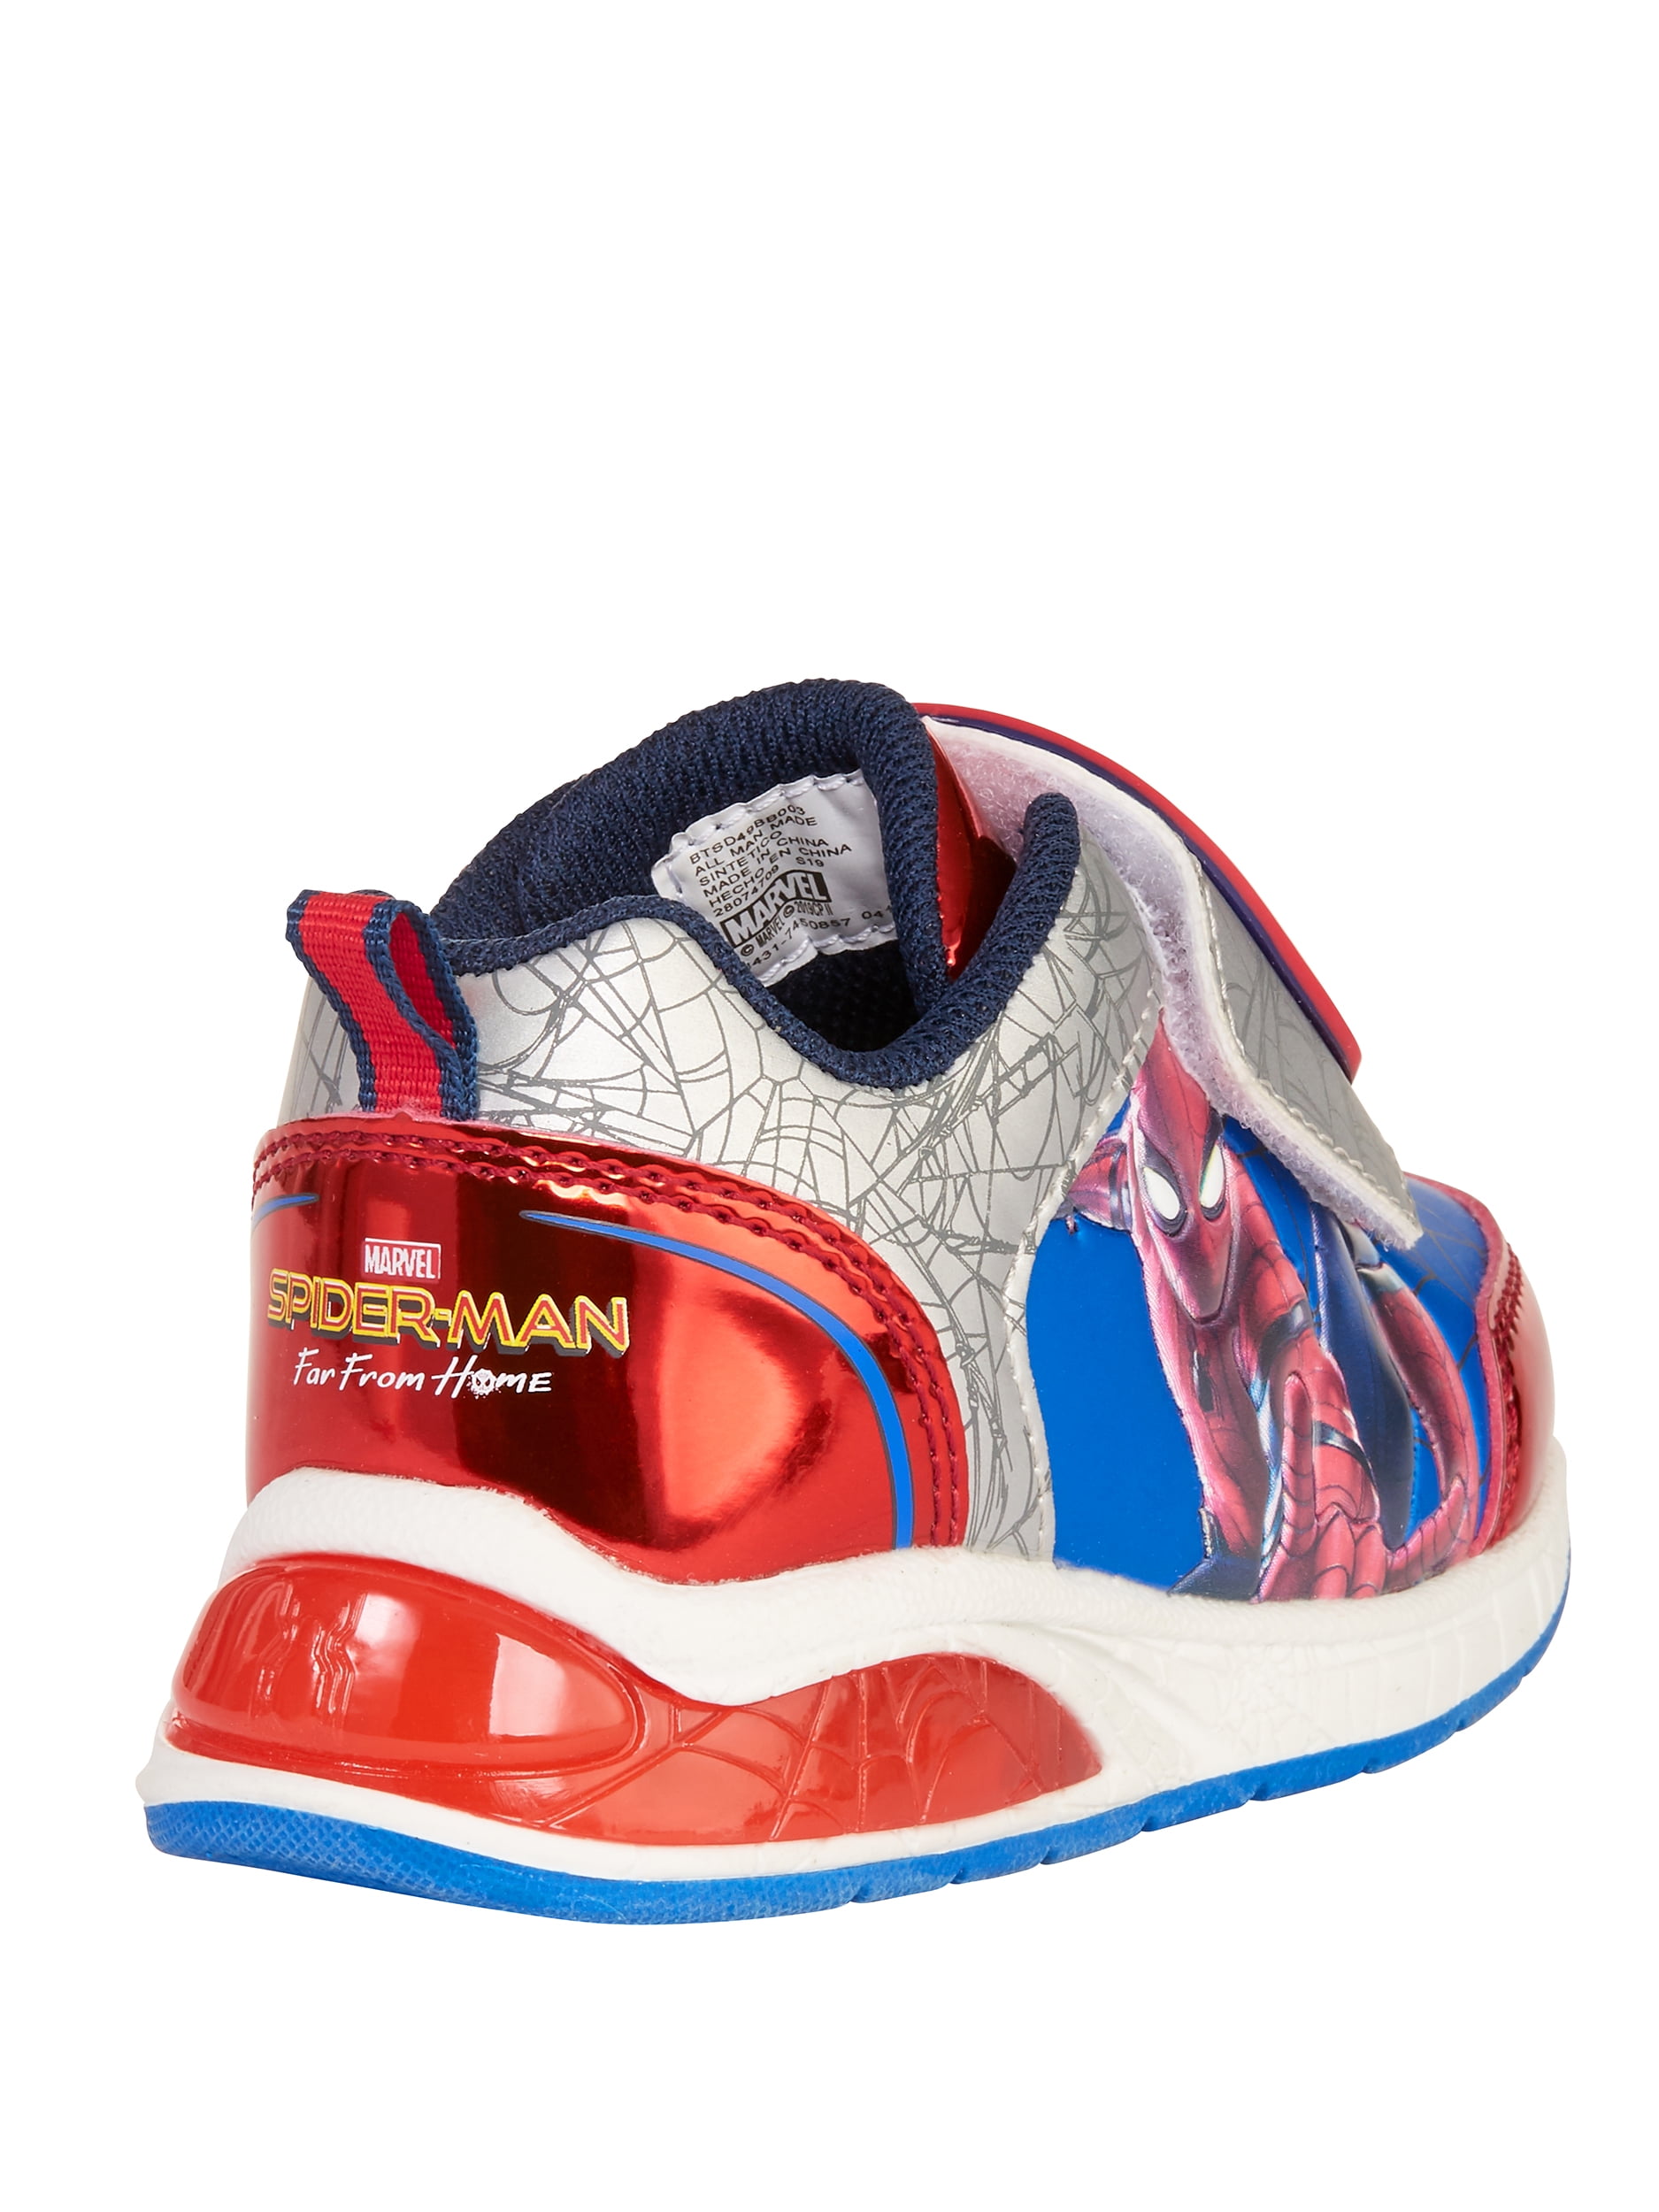 Boy's Spiderman Lighted Athletic Shoes 